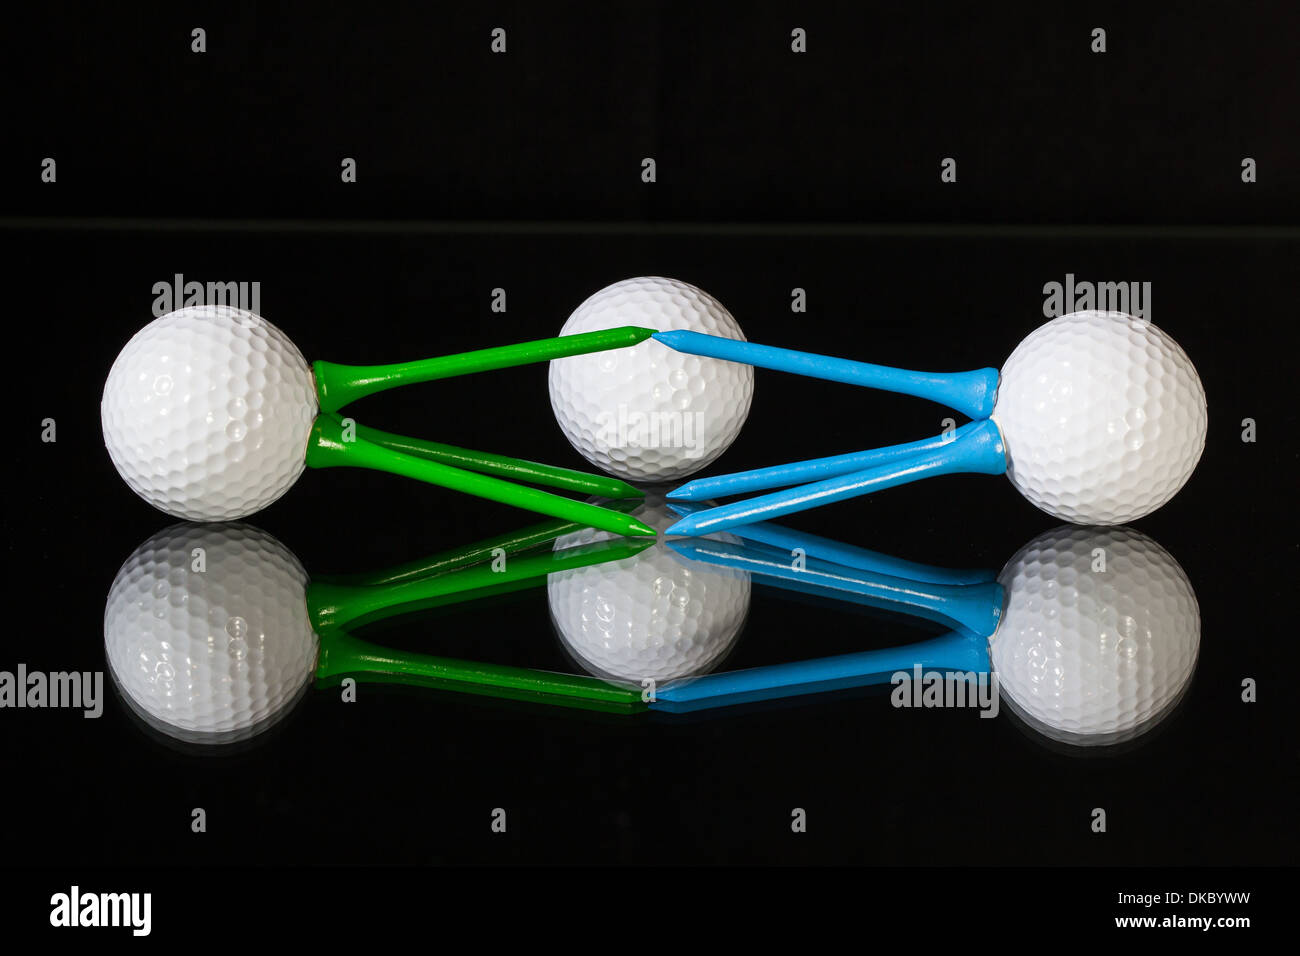 White Golf Balls And Different Colored Tees On A Black Desk Stock